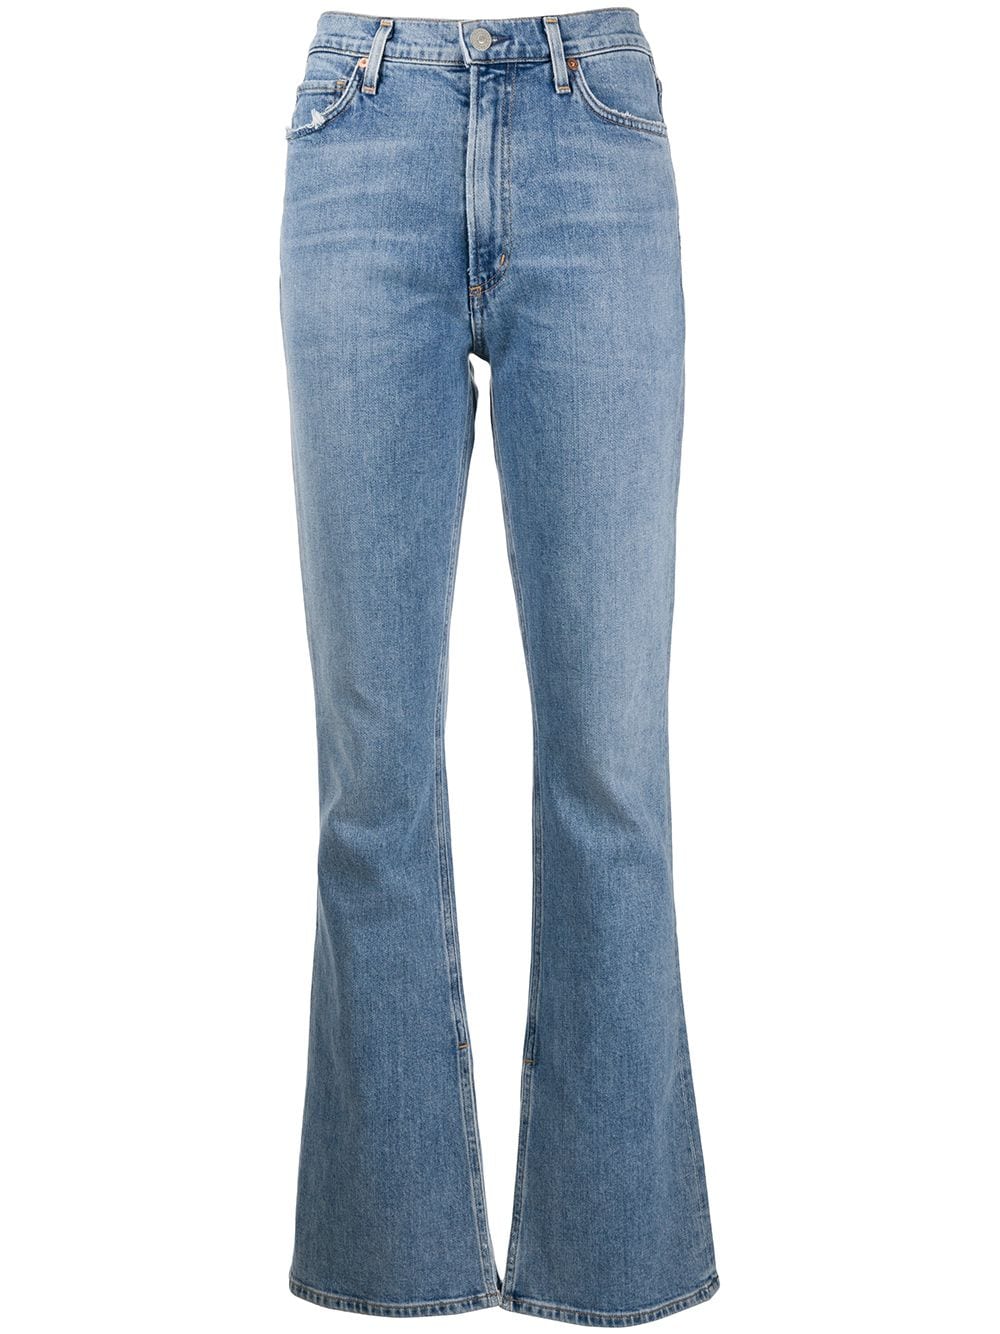 CITIZENS OF HUMANITY SKINNY BOOTCUT JEANS